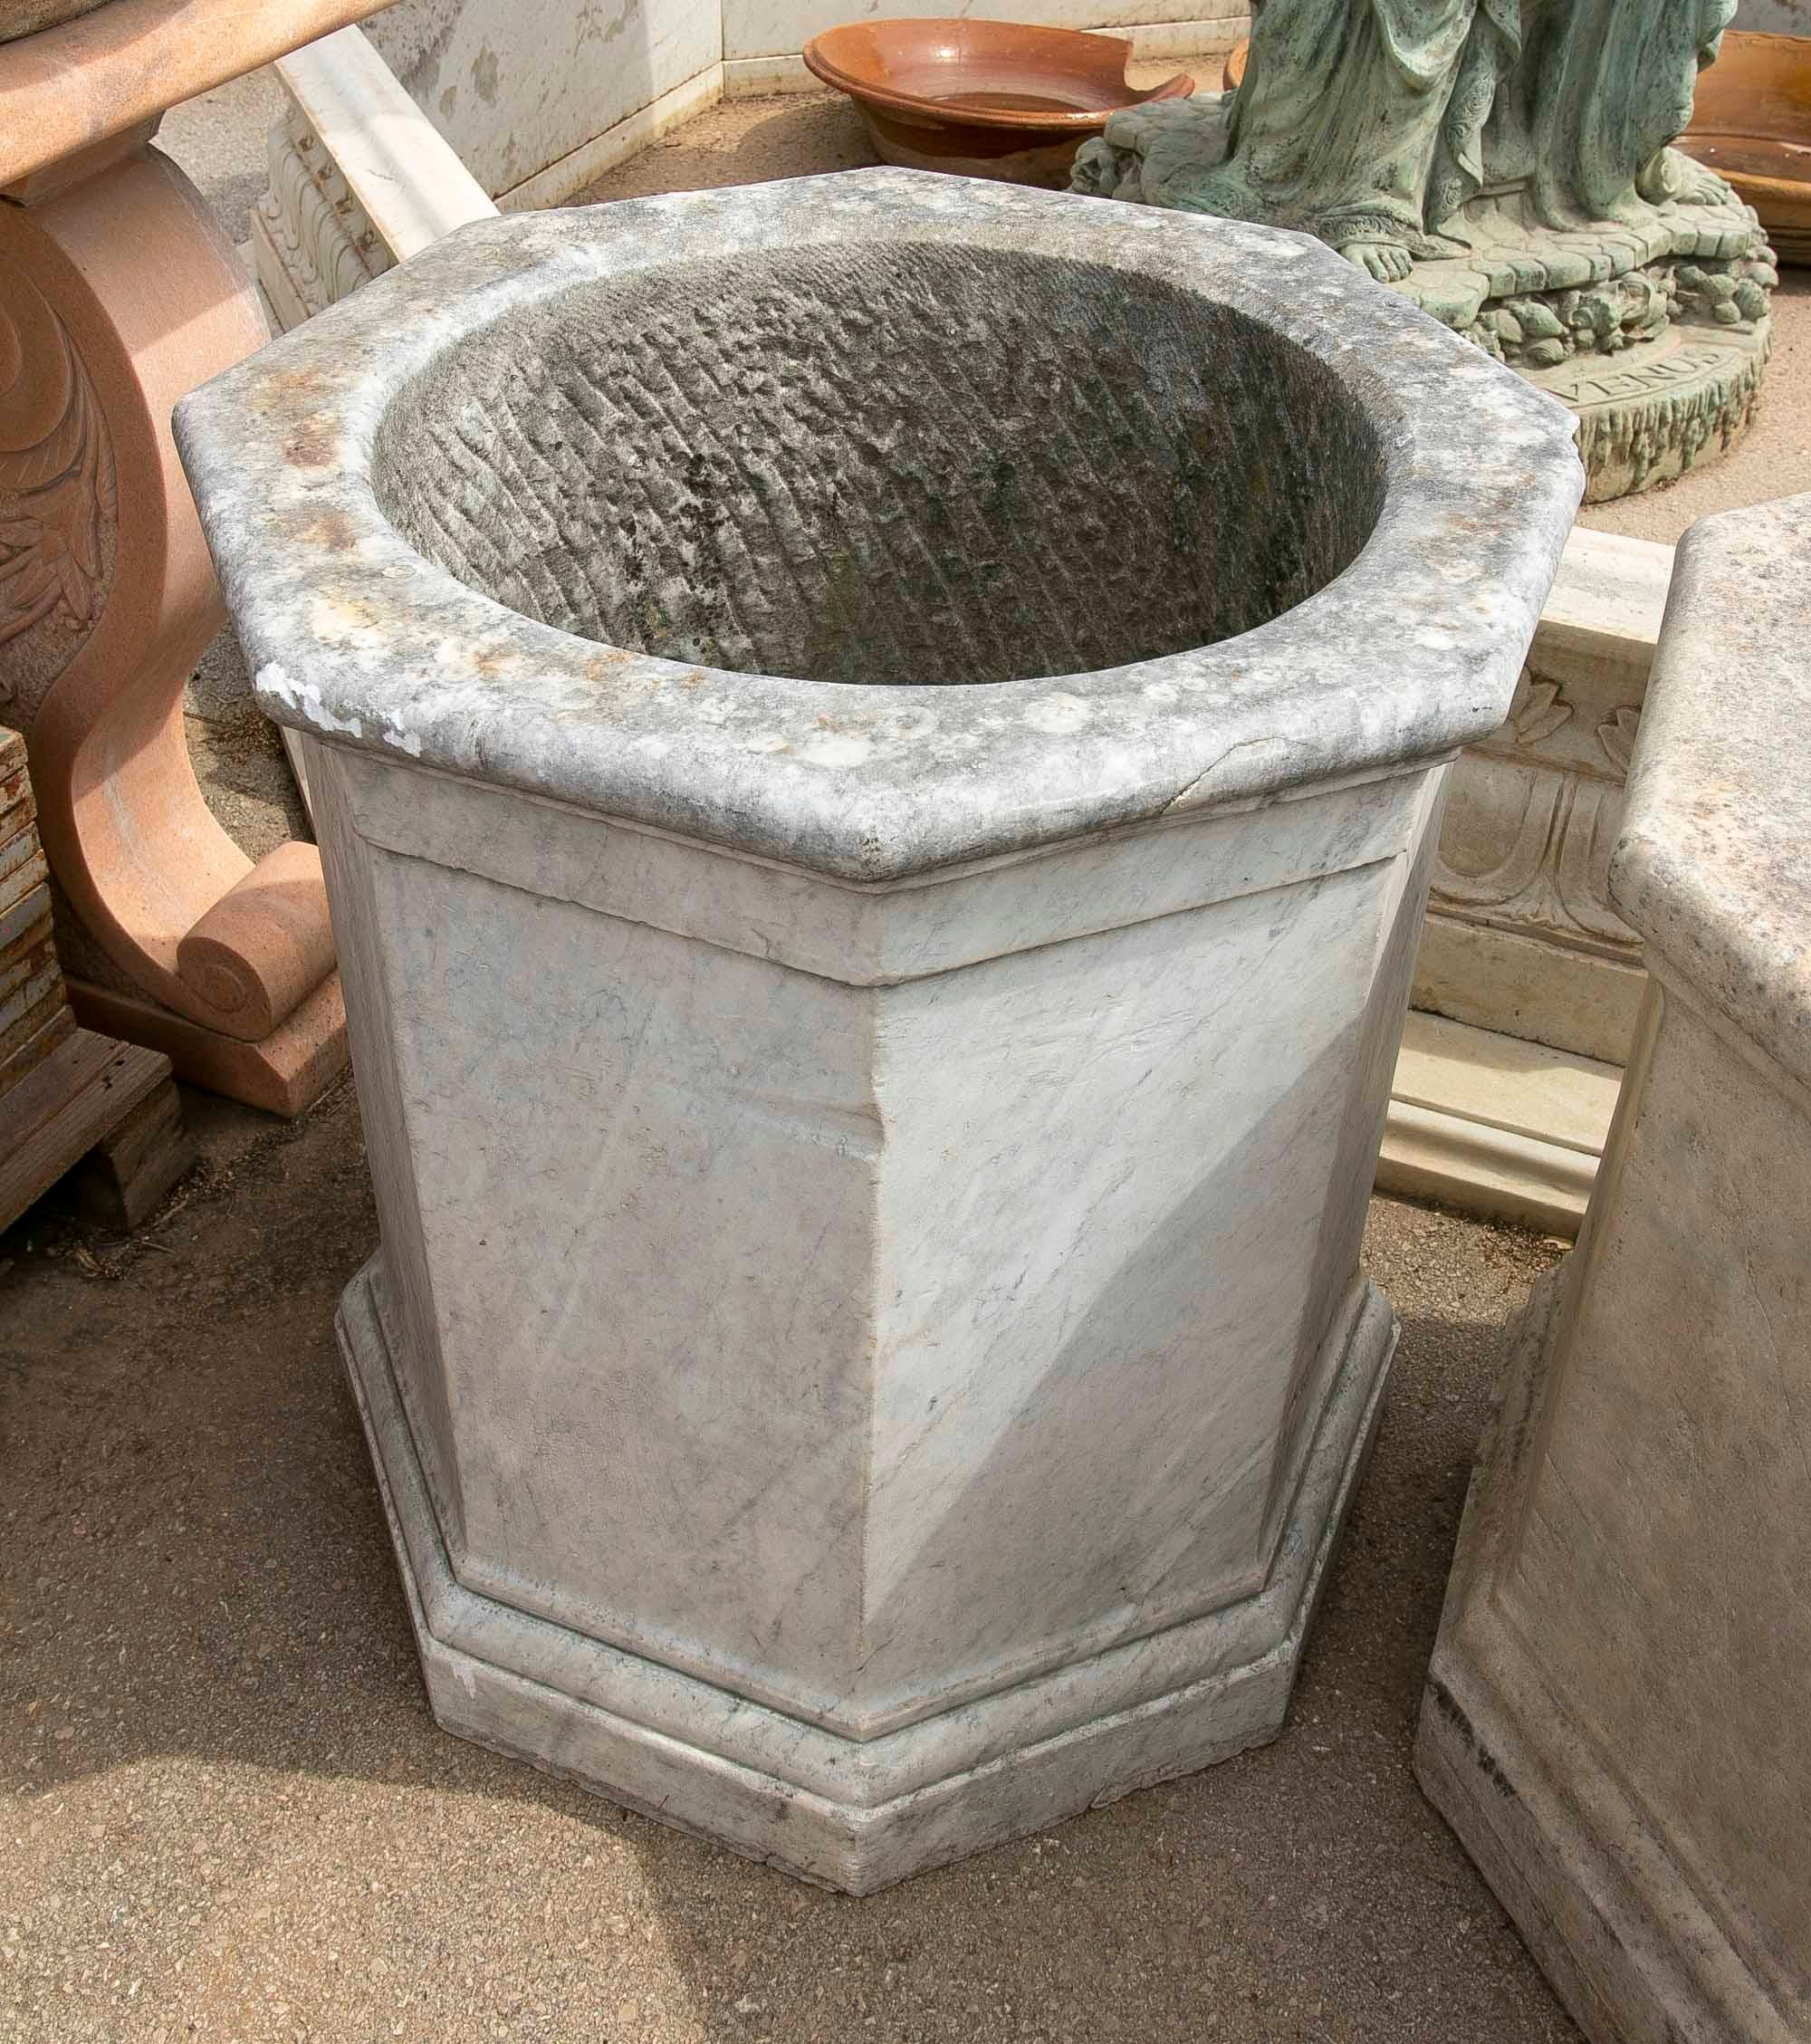 18th Century Spanish White Marble Octagonal  Well Spout

